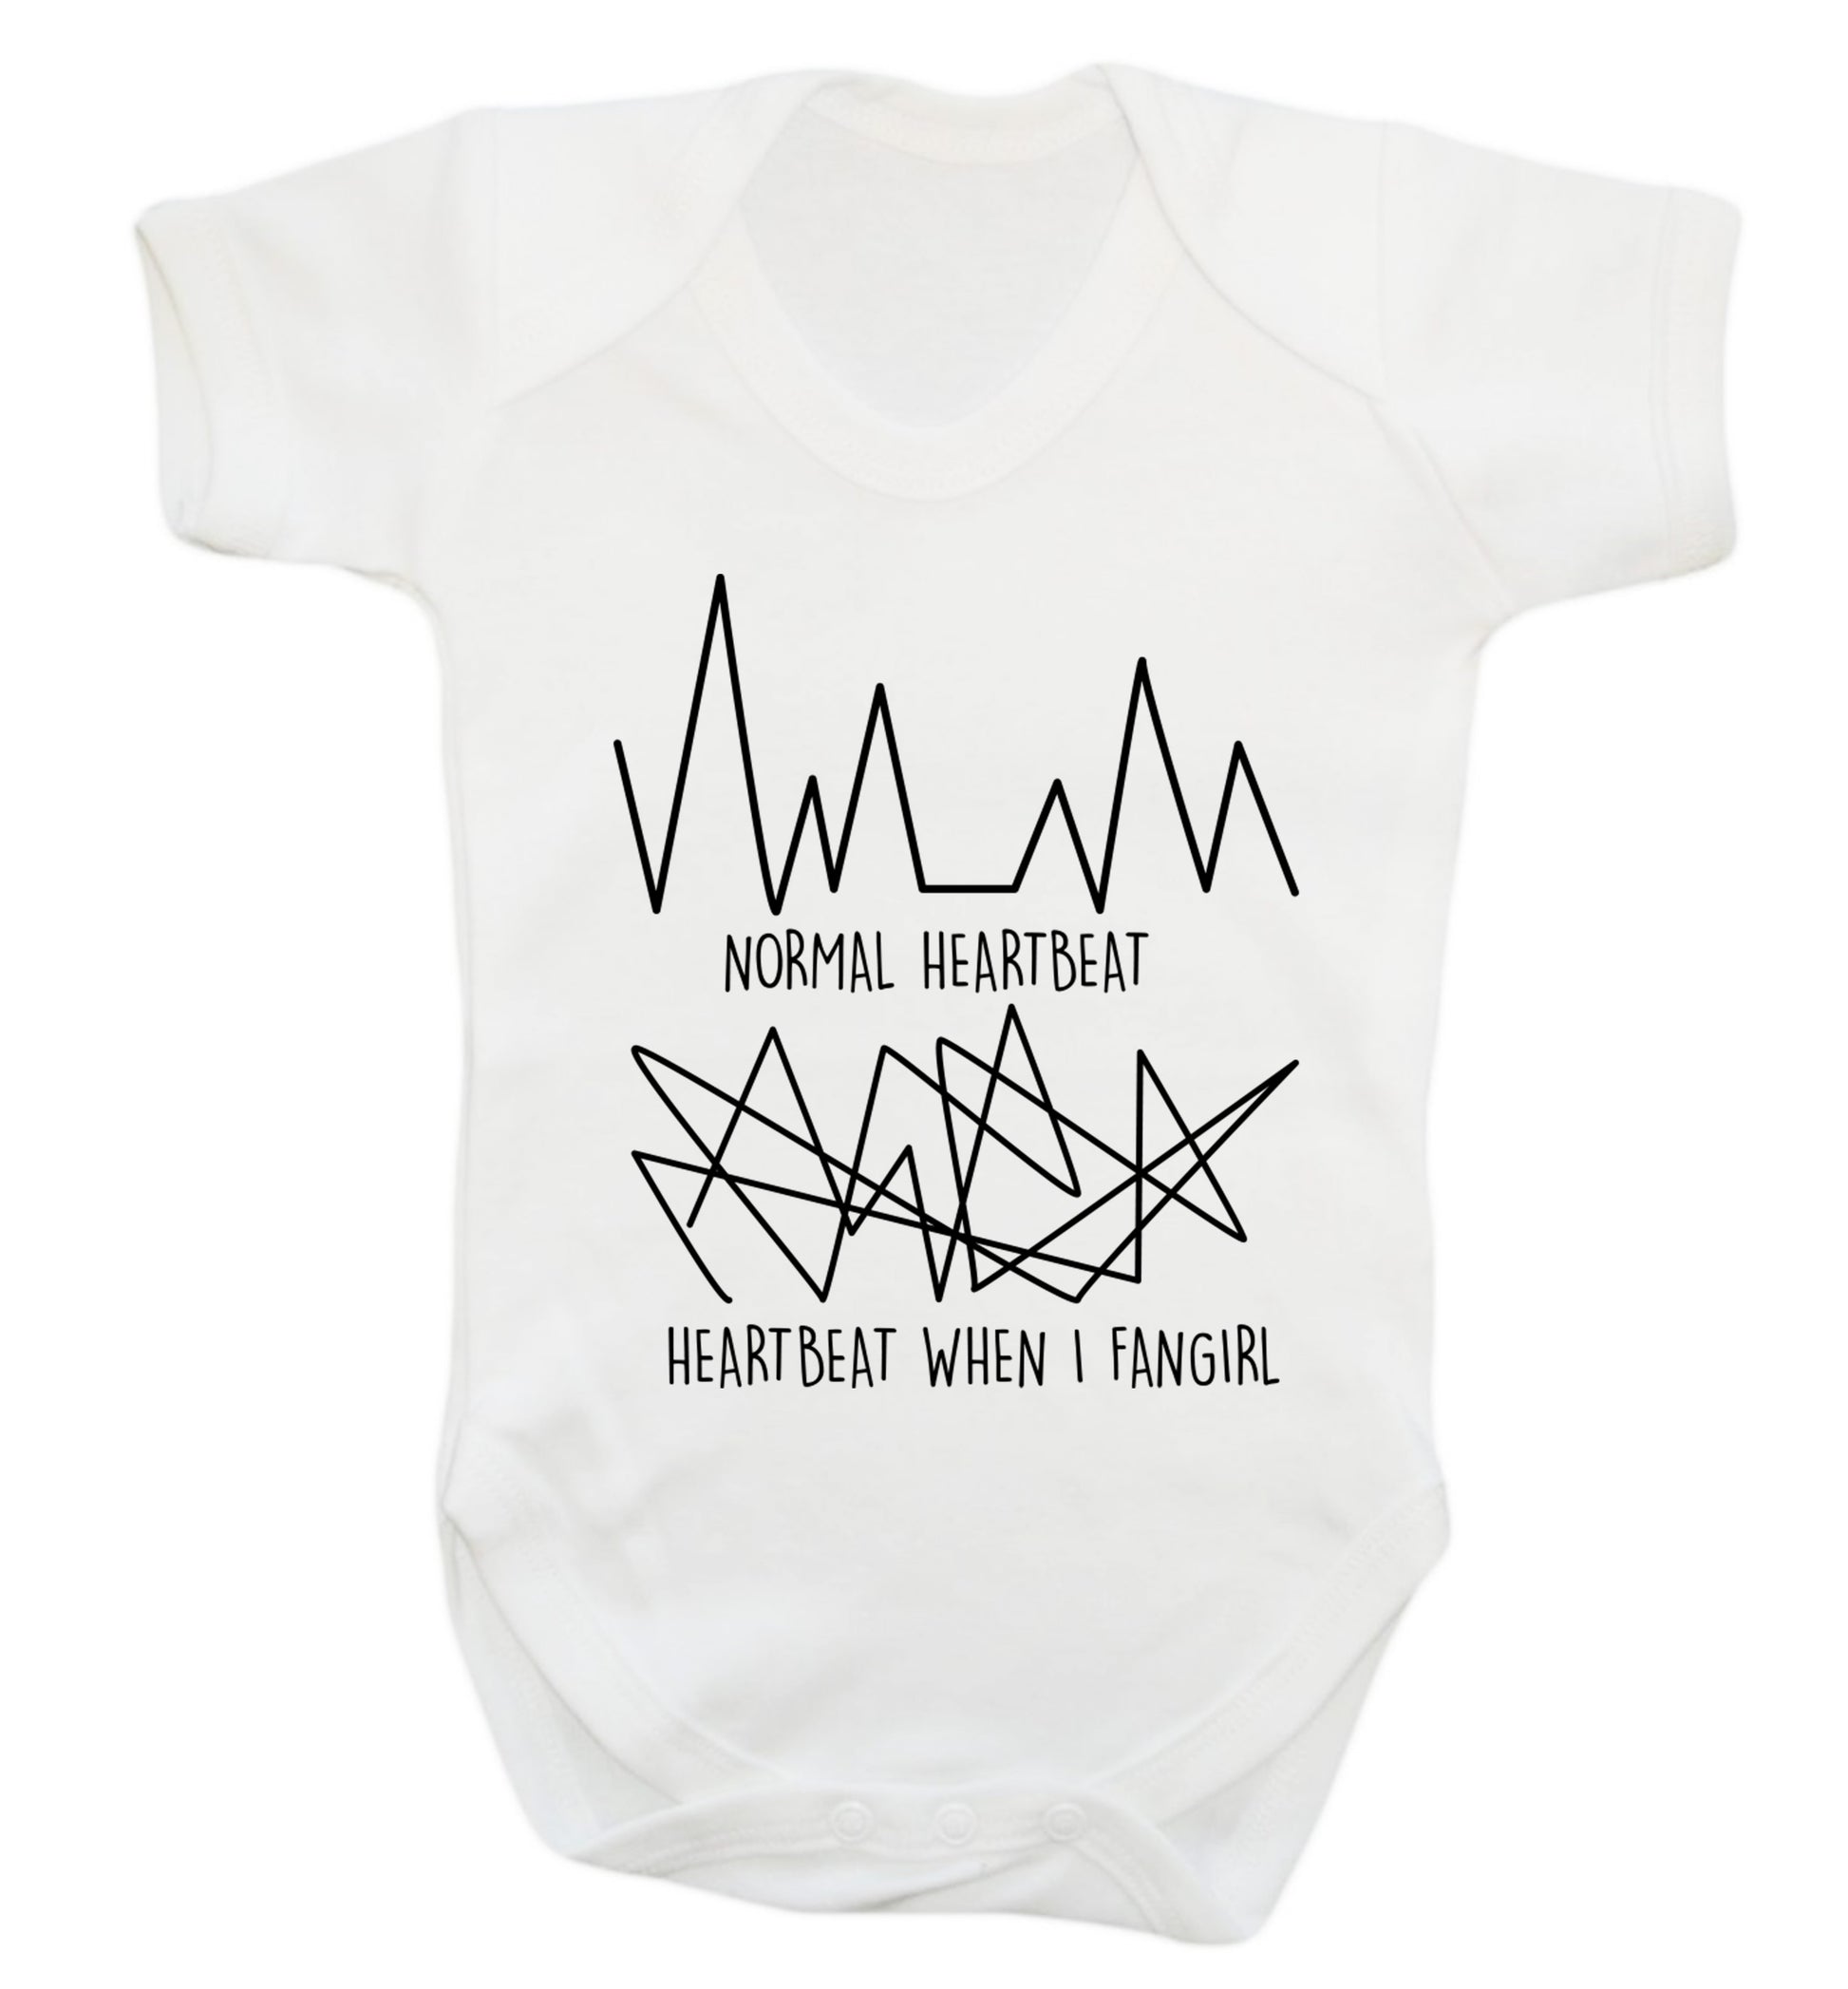 Normal heartbeat heartbeat when I fangirl Baby Vest white 18-24 months